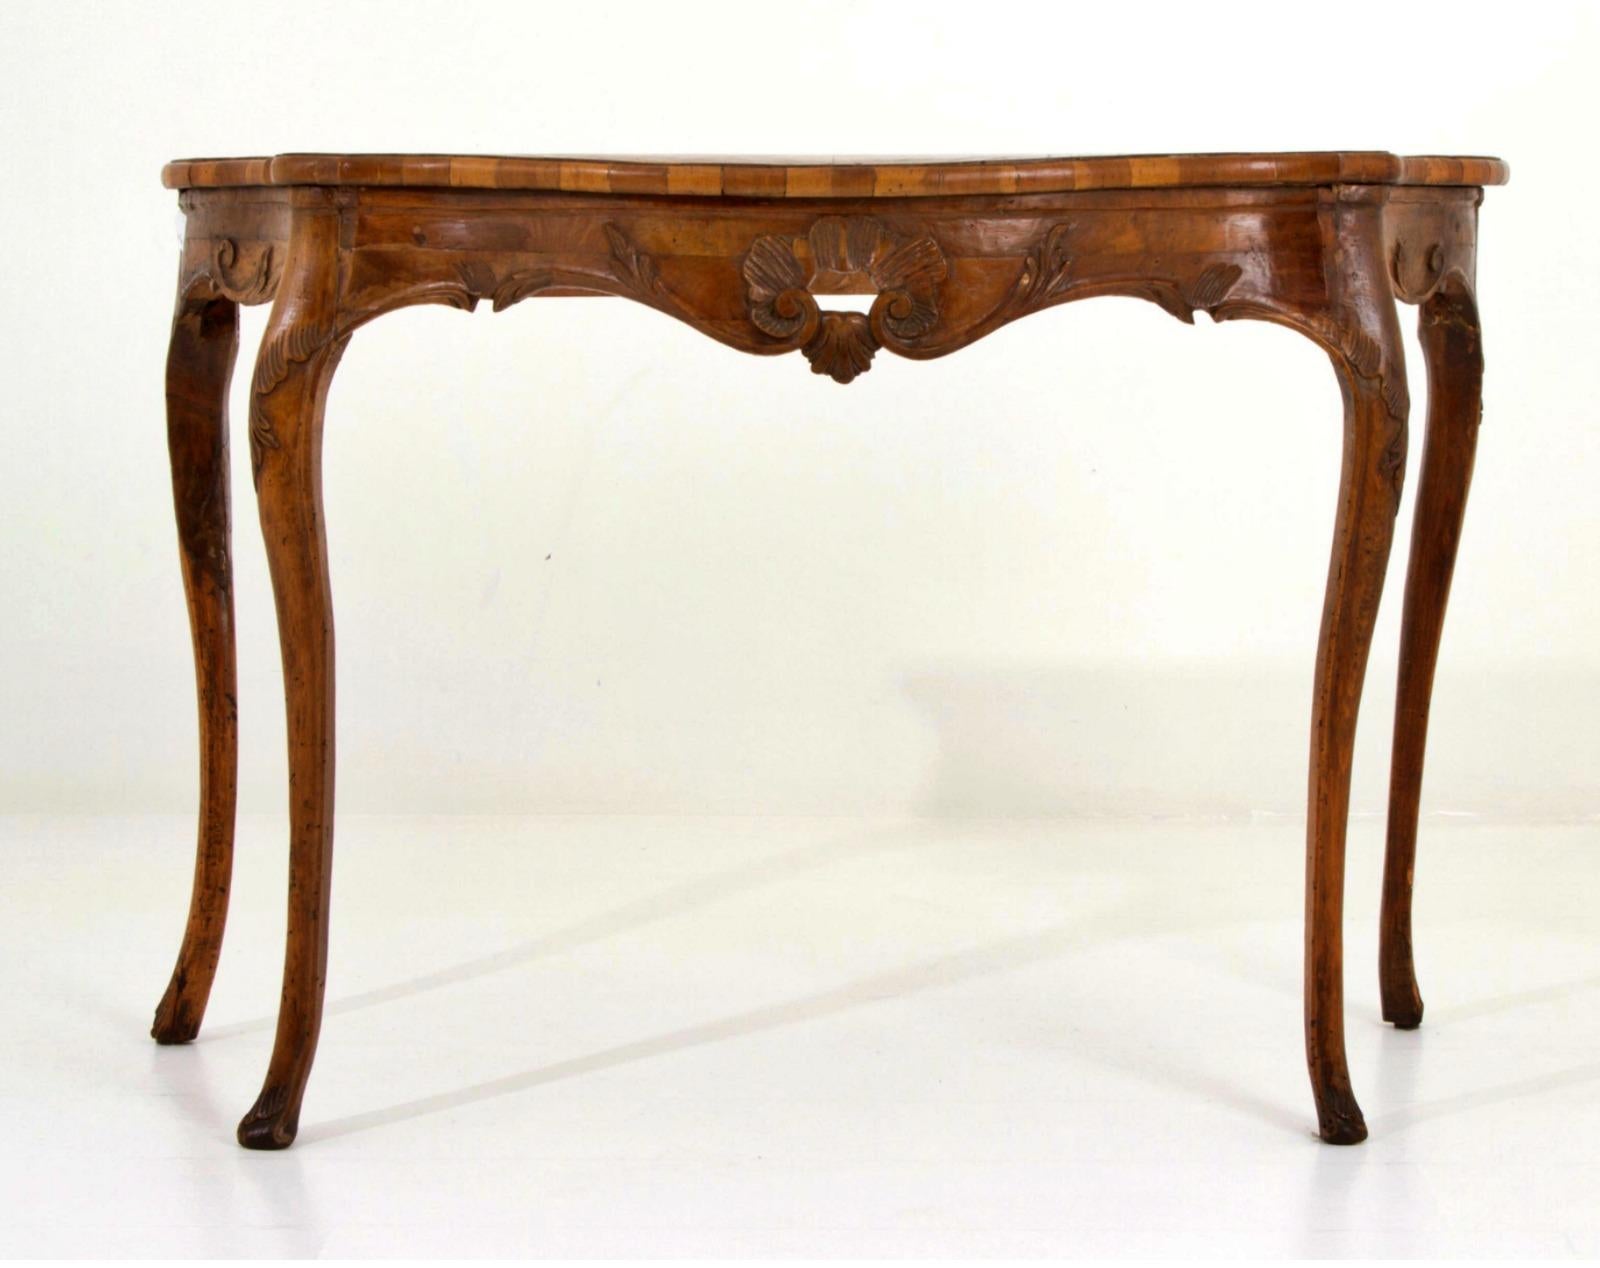 Italian console in carved wood Veneto 18th century
in carved wood with veneered and threaded top. 
Veneto. 18th century. 
Dimension

78x122x55 cm ca.
Very good condition.